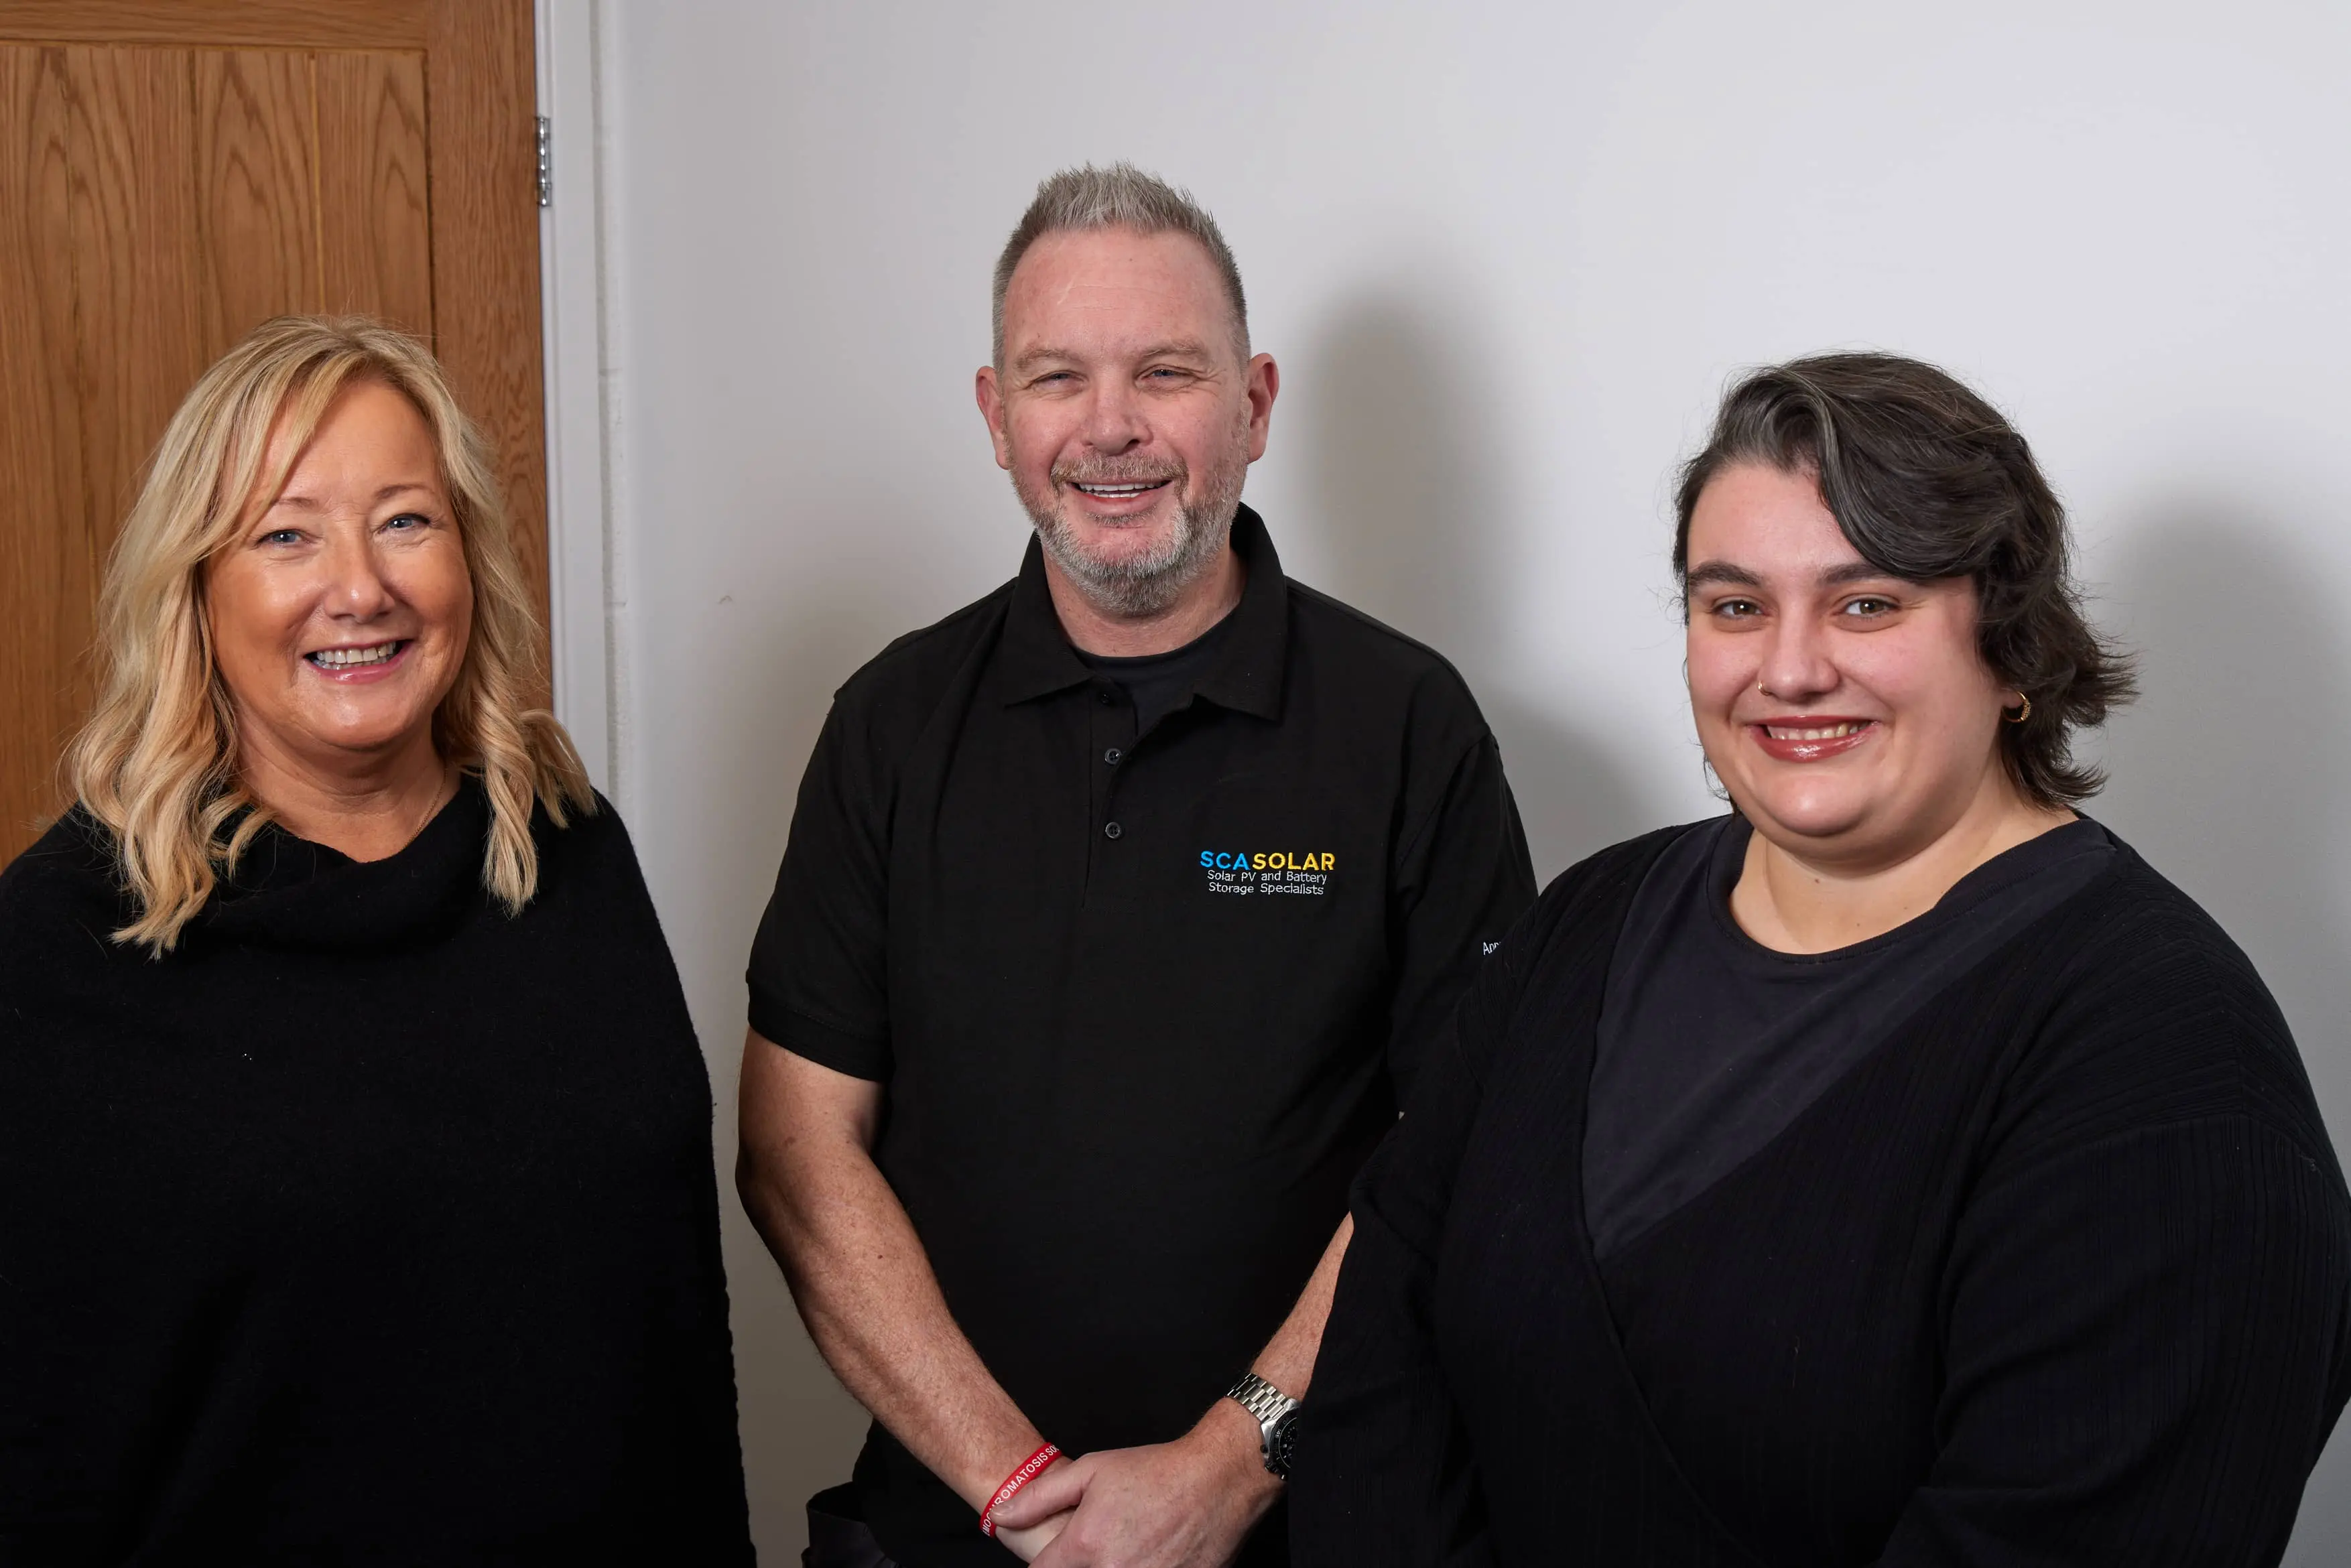 Three Professional Solar Panel Installers based in Cheshire standing and smiling indoors, two women and one man in the middle wearing a black shirt with "SCASOLAR" logo.